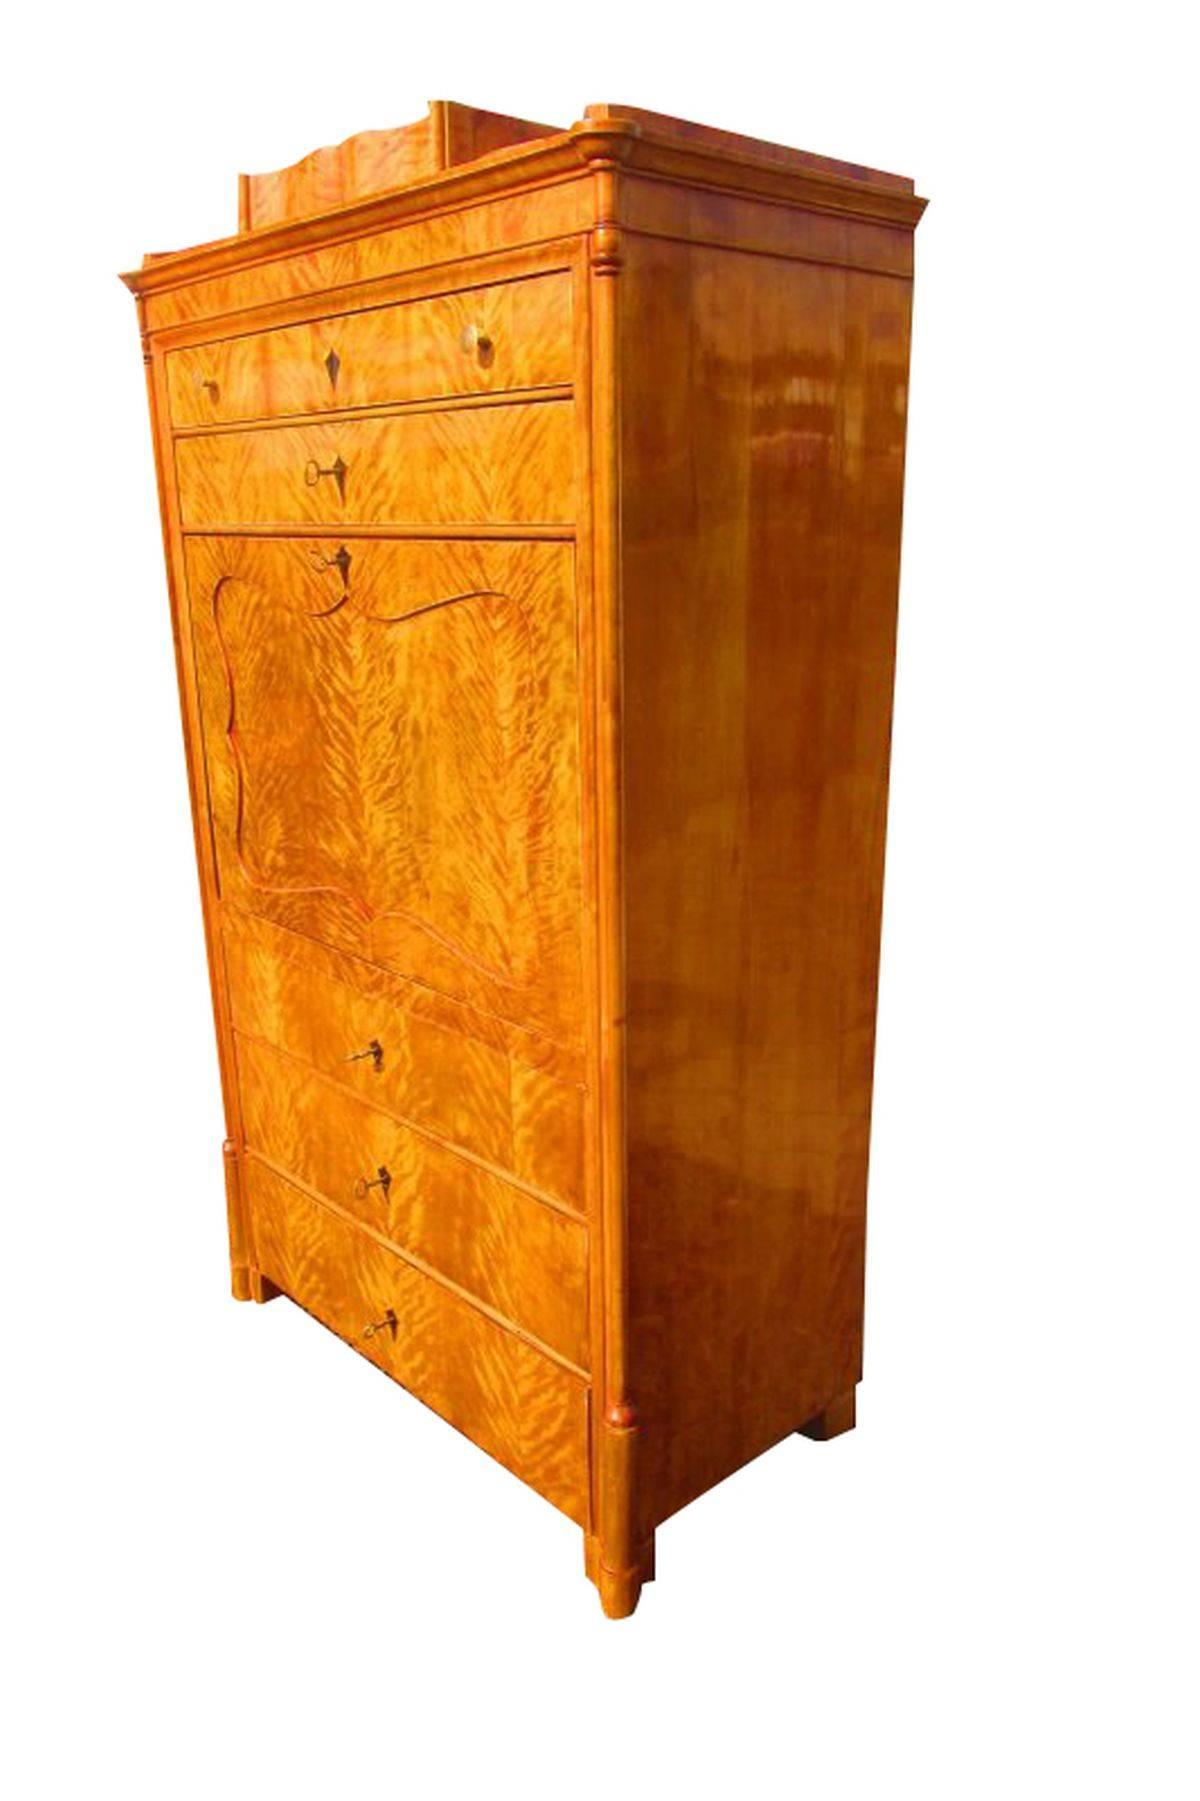 Biedermeier Secretary with a birch veneer. The wonderful grain is hand polished and adds a wonderful tone to the furniture. It has a great interior with 16 drawers and a writing flap which is hingedable. A typical Biedermeier secretary.

Birch